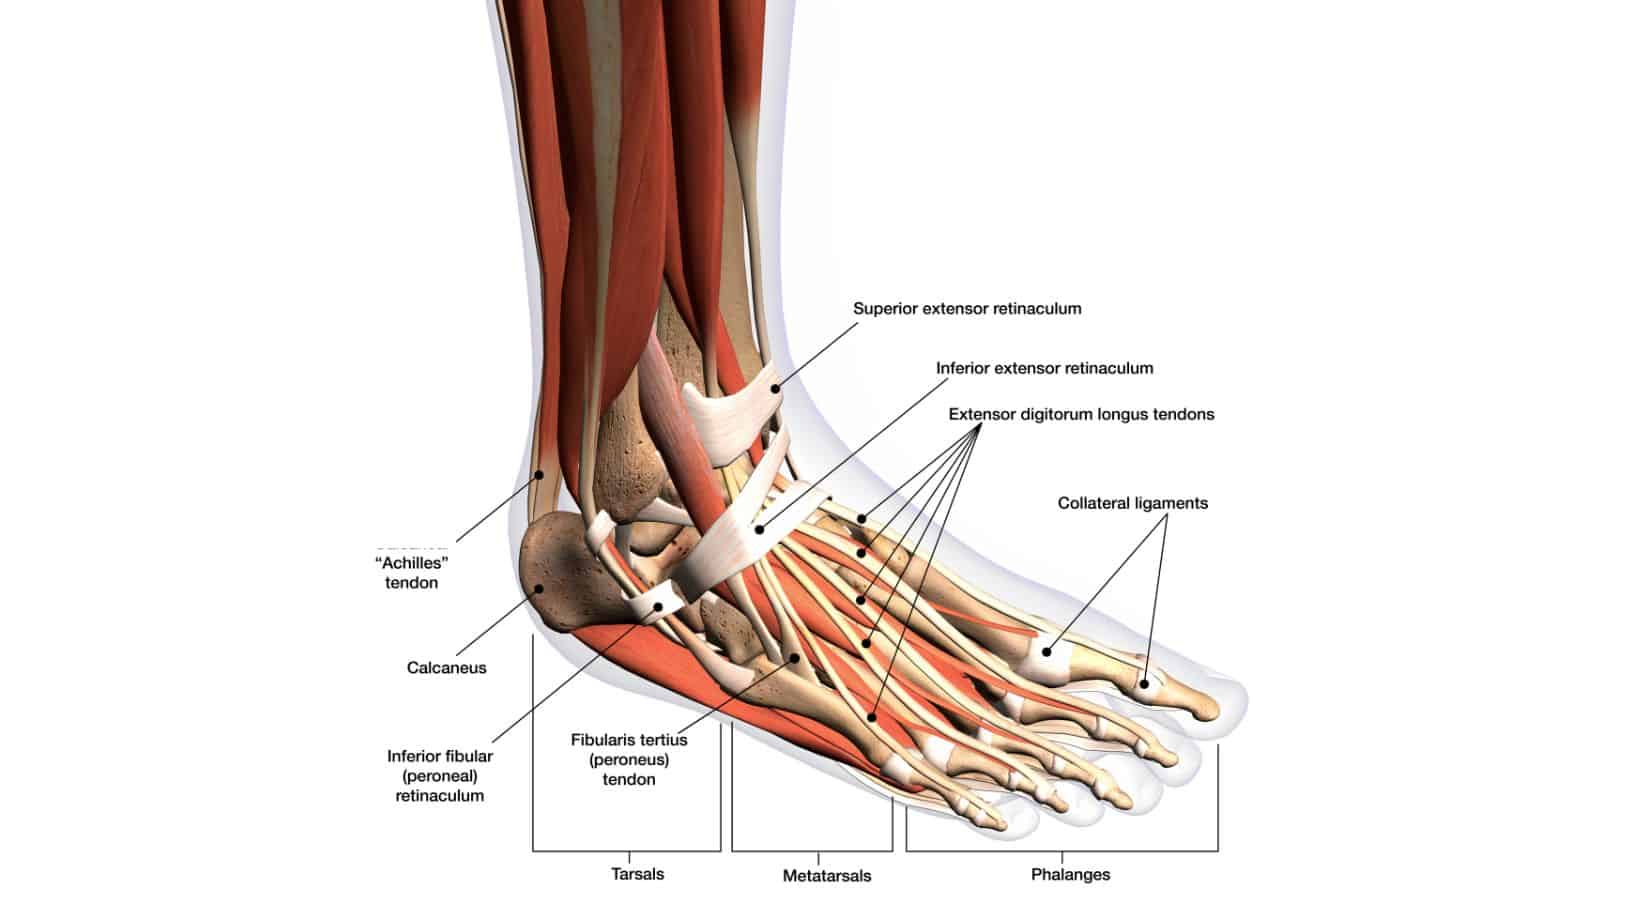 Ankle Tendons: Anatomy, Attachments and Function by a Specialist